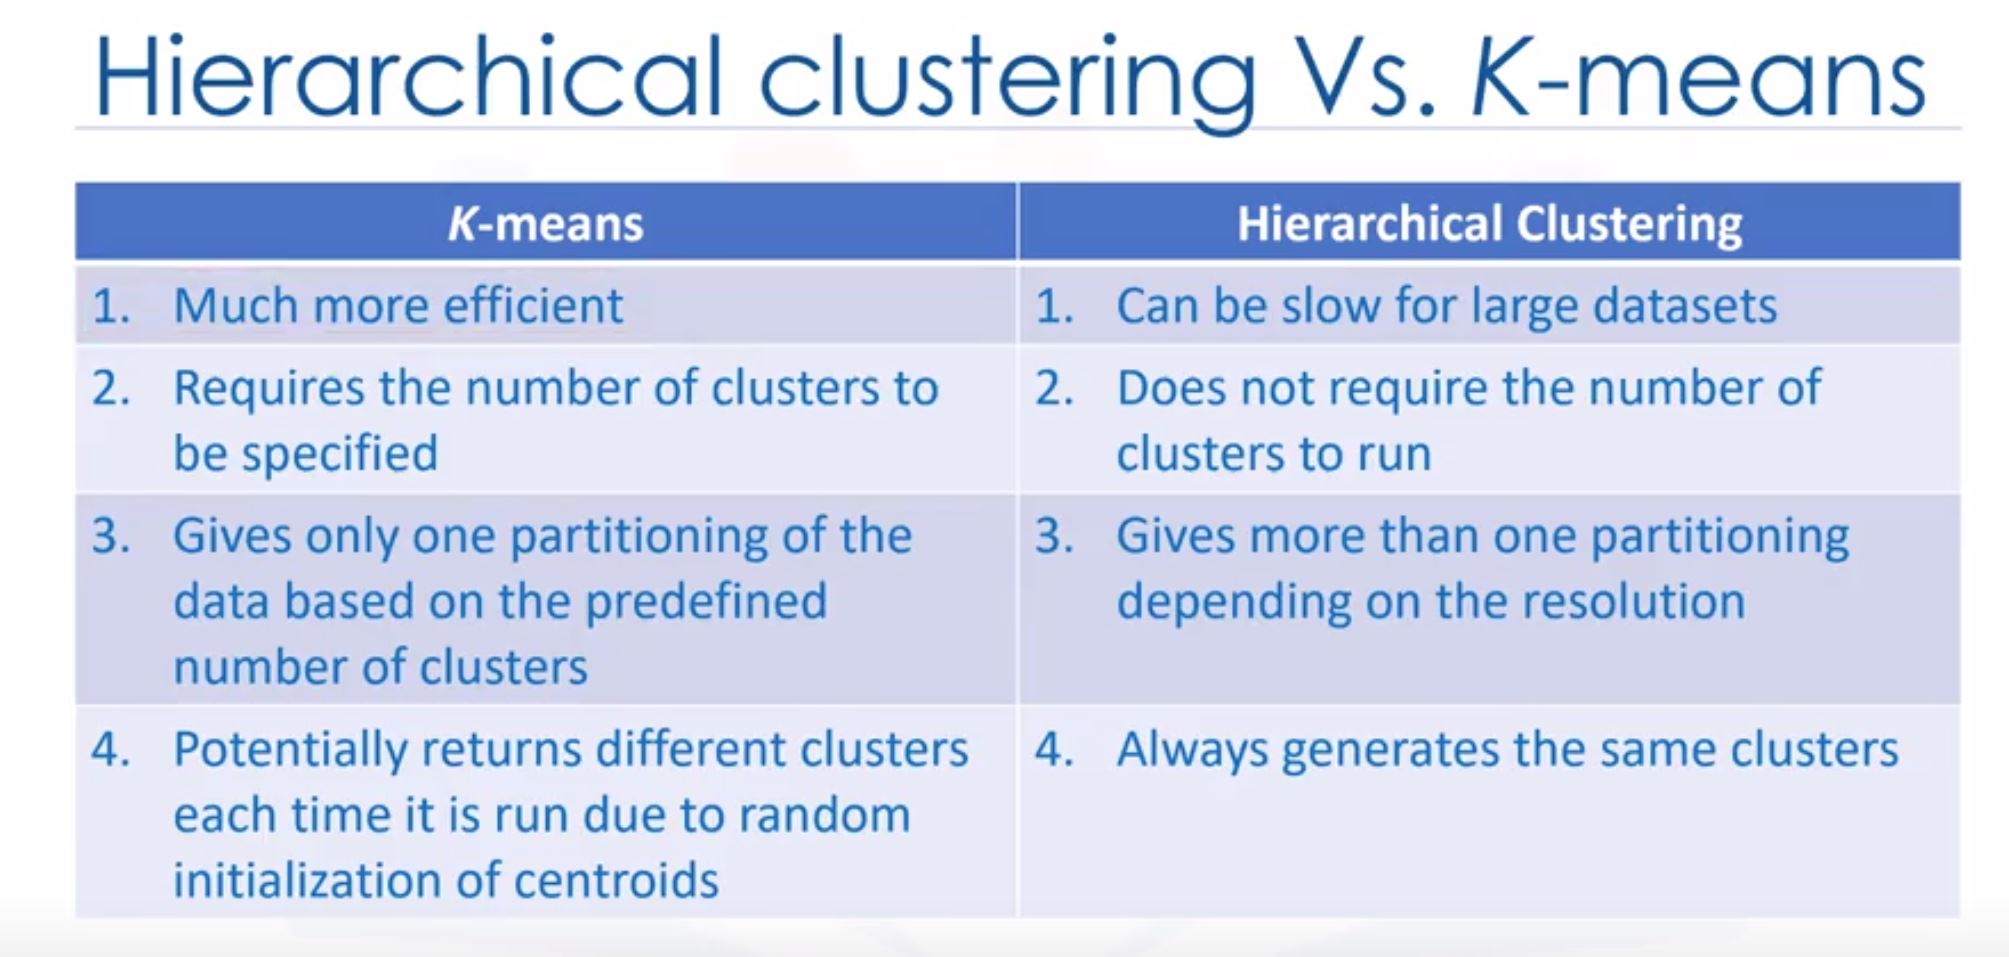 Hierarchical clustering vs K-means